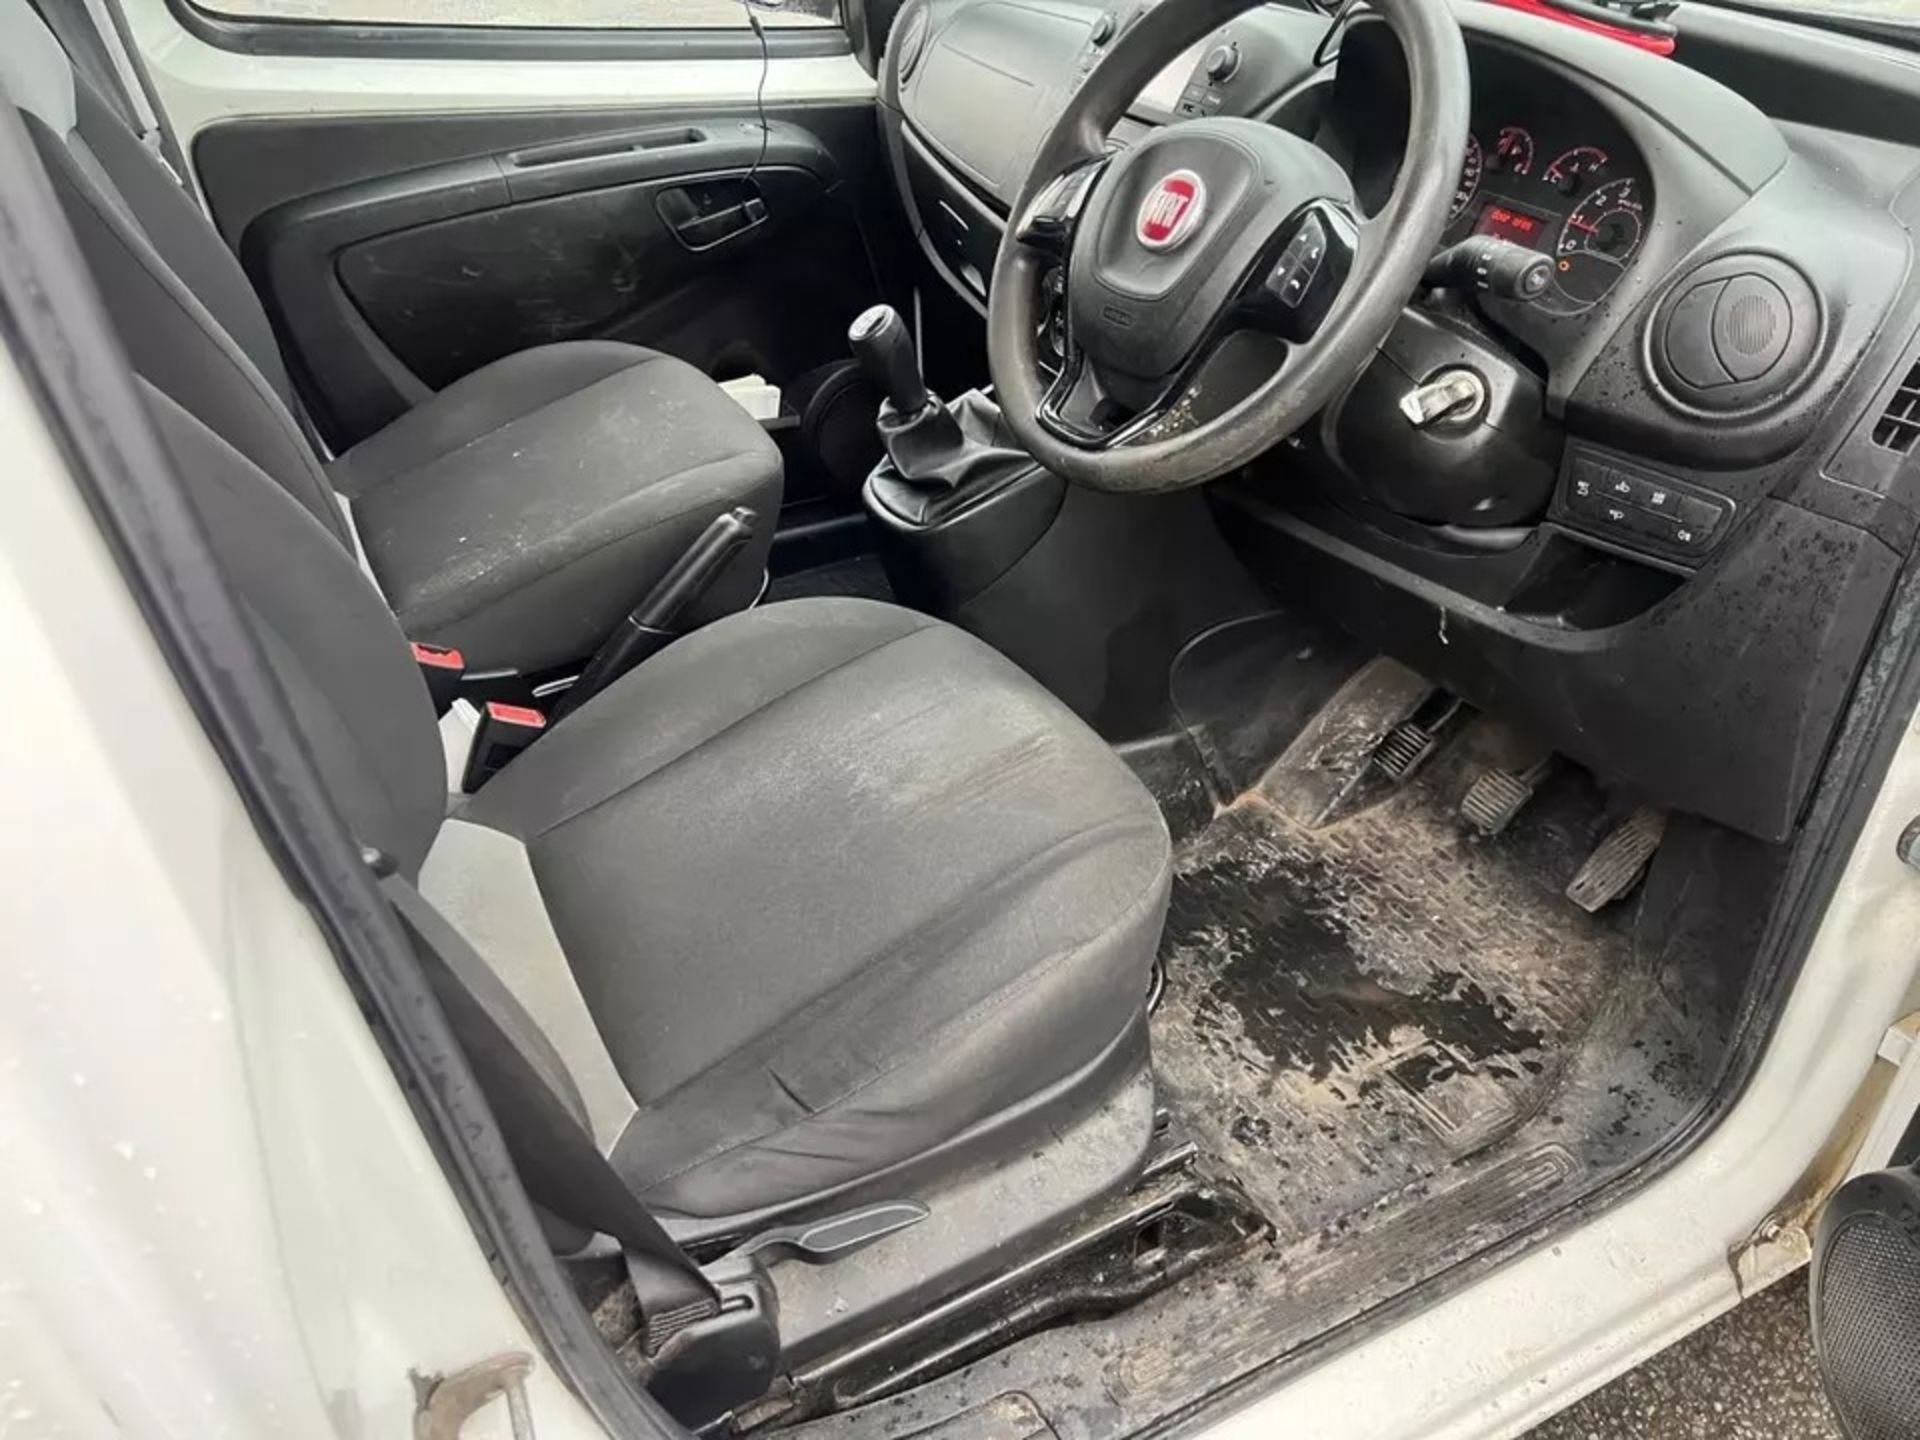 FIAT FIORINO SX 1.3 HDI VAN 2019 - LOADED WITH FEATURES, SOLD FOR SPARES OR REPAIRS - Image 9 of 12